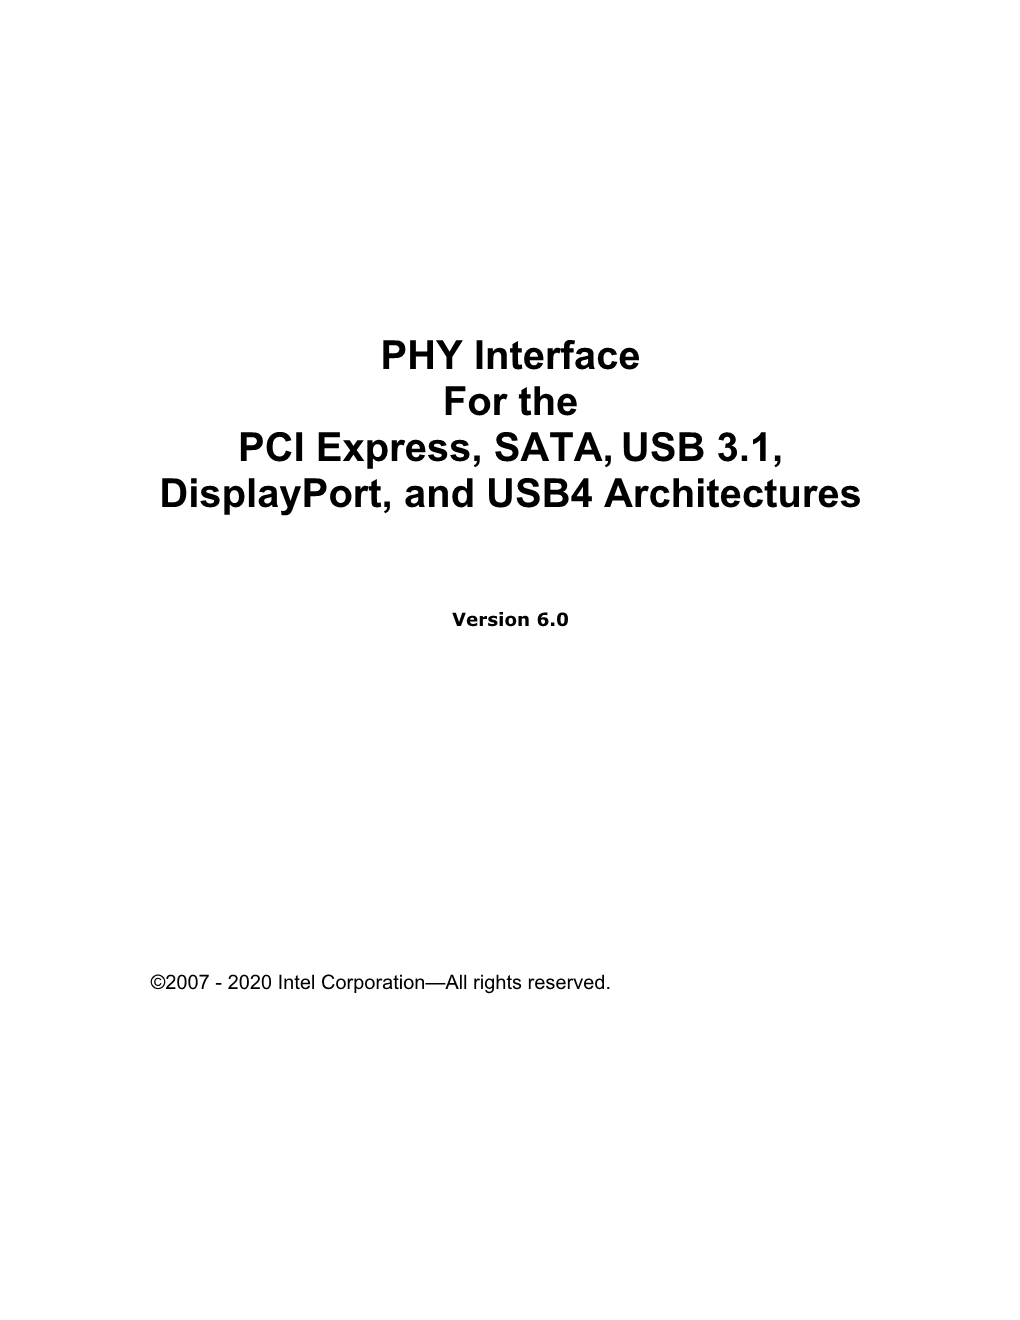 PHY Interface for the PCI Express*, SATA, USB 3.1, Displayport